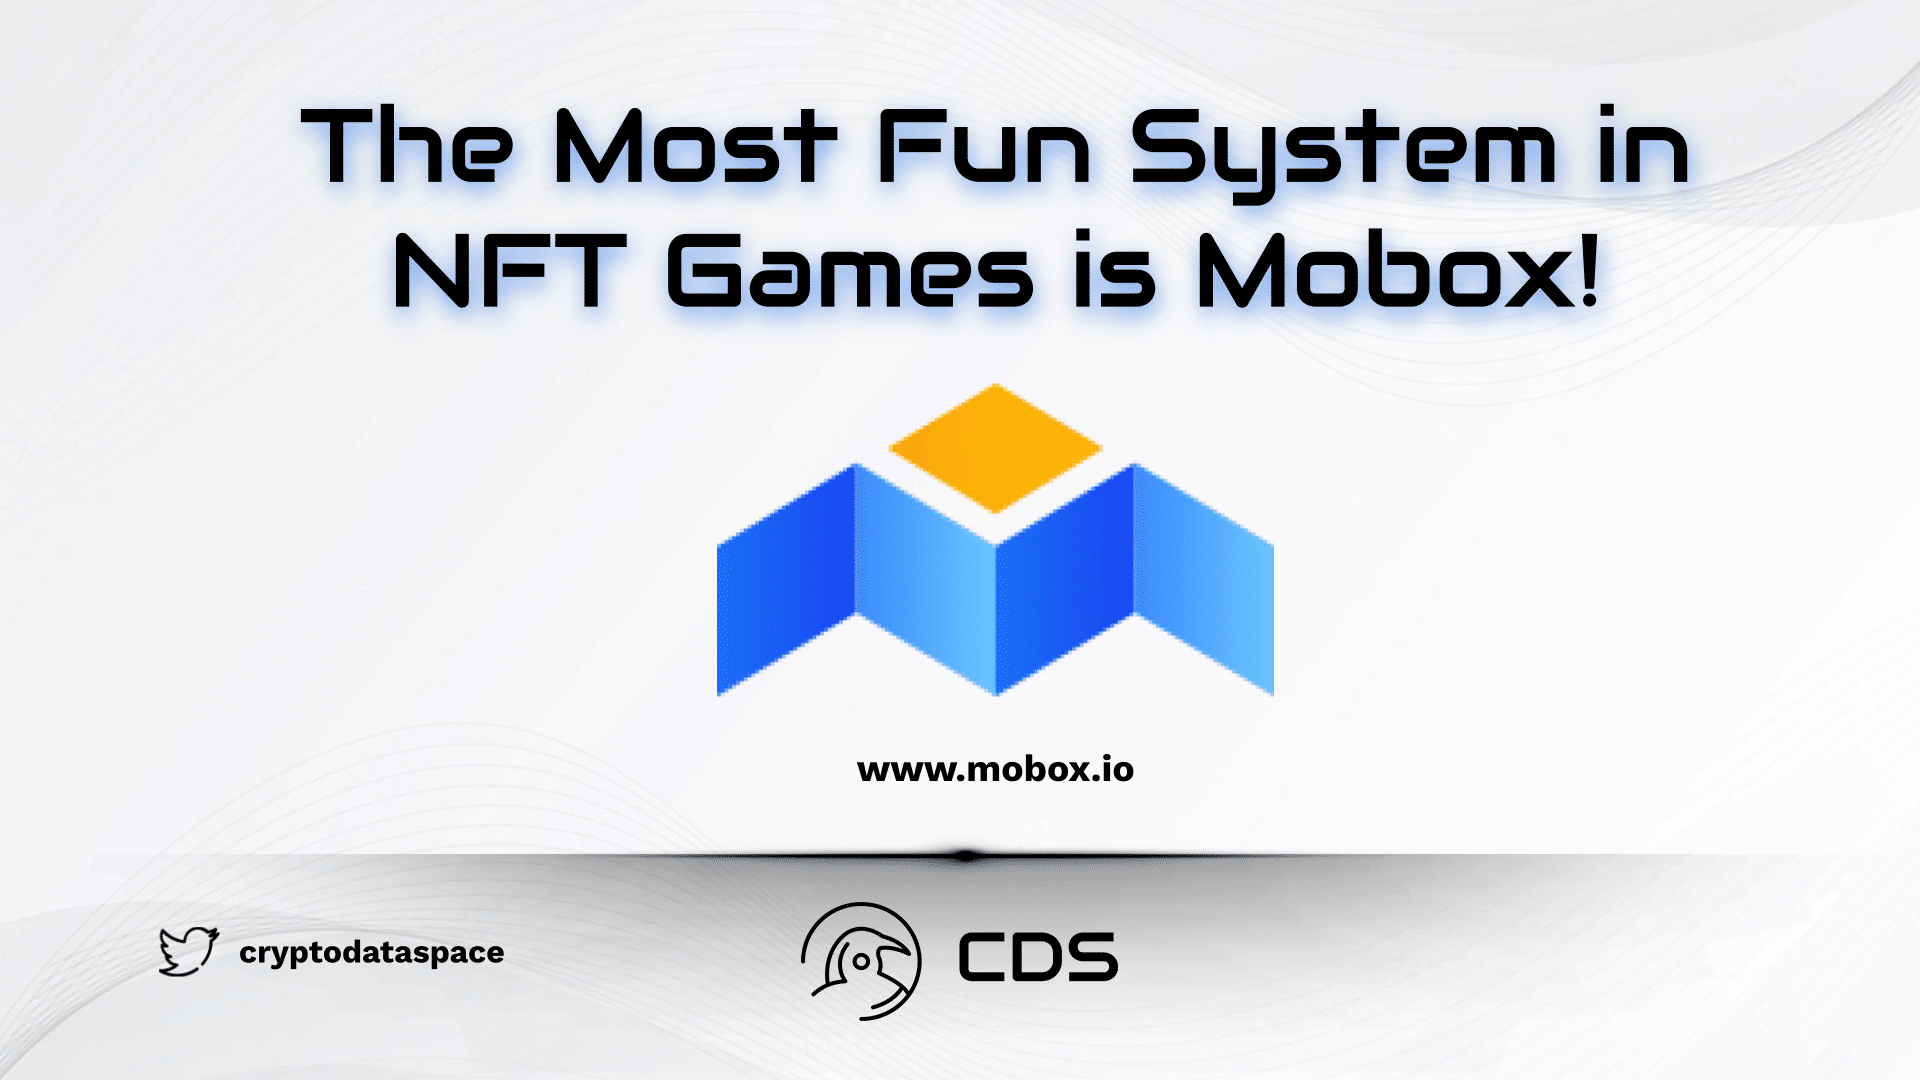 The Most Fun System in NFT Games is Mobox!